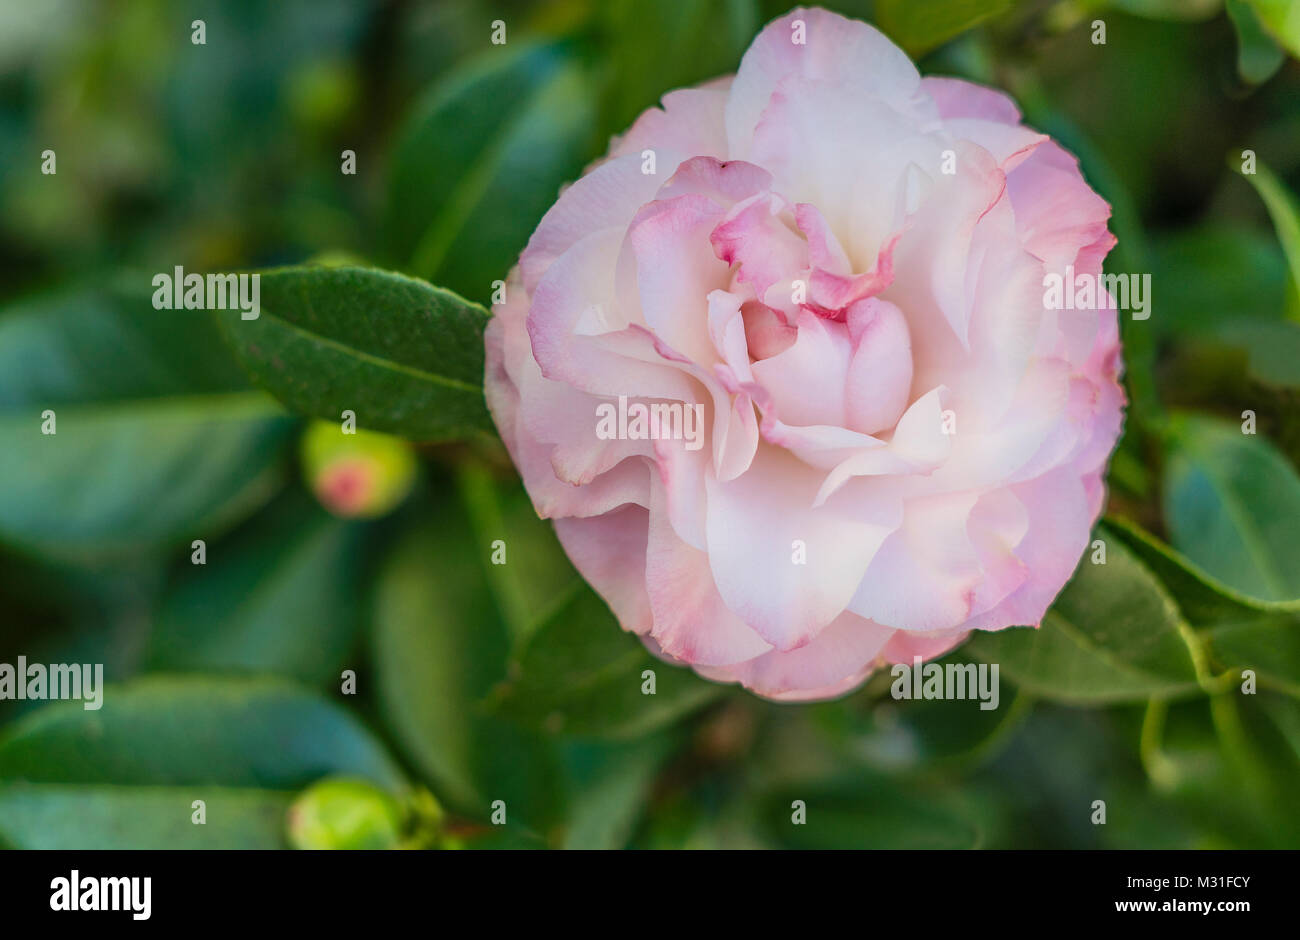 Pink Camellia on bush with dark green leaves behind it. Stock Photo